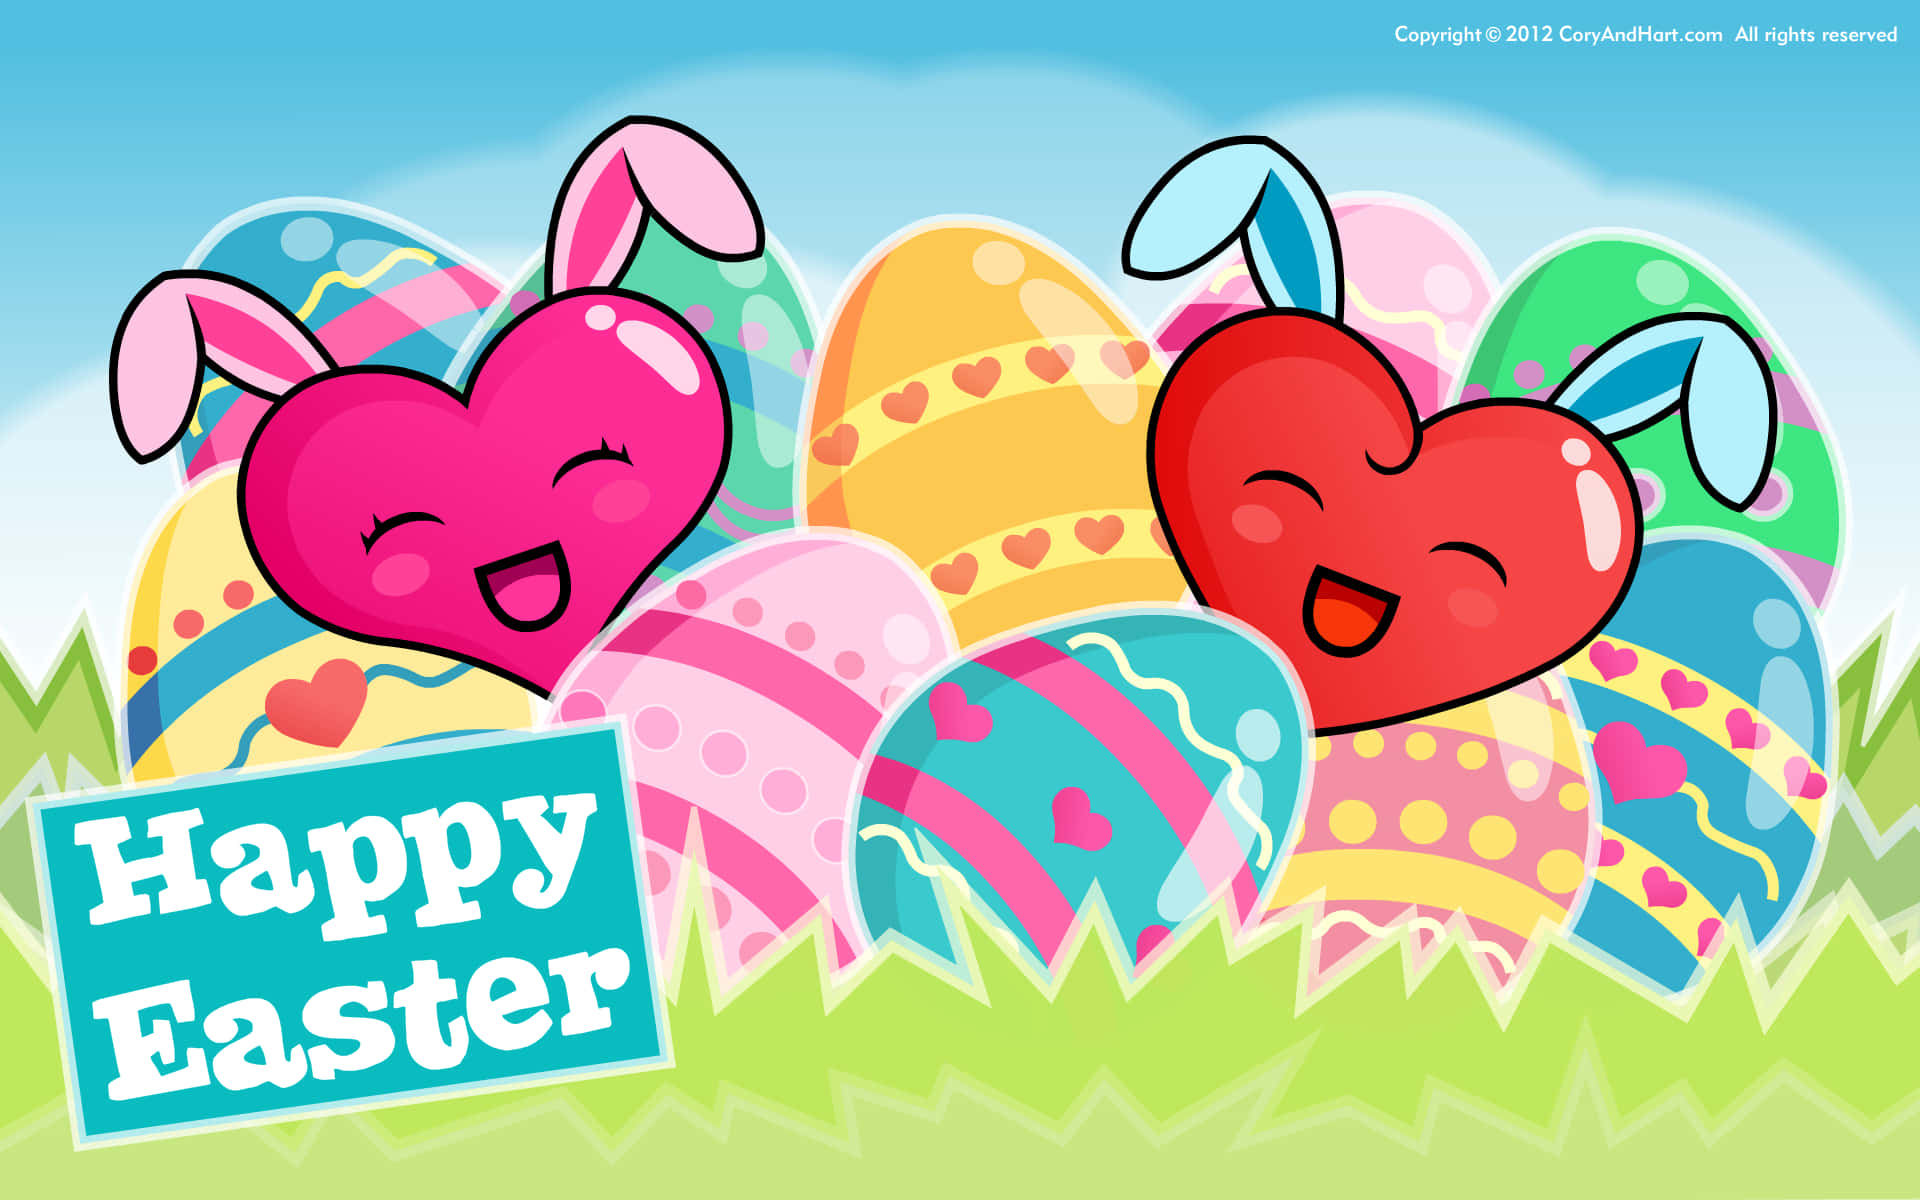 Celebrate Easter with this cute, happy illustration Wallpaper